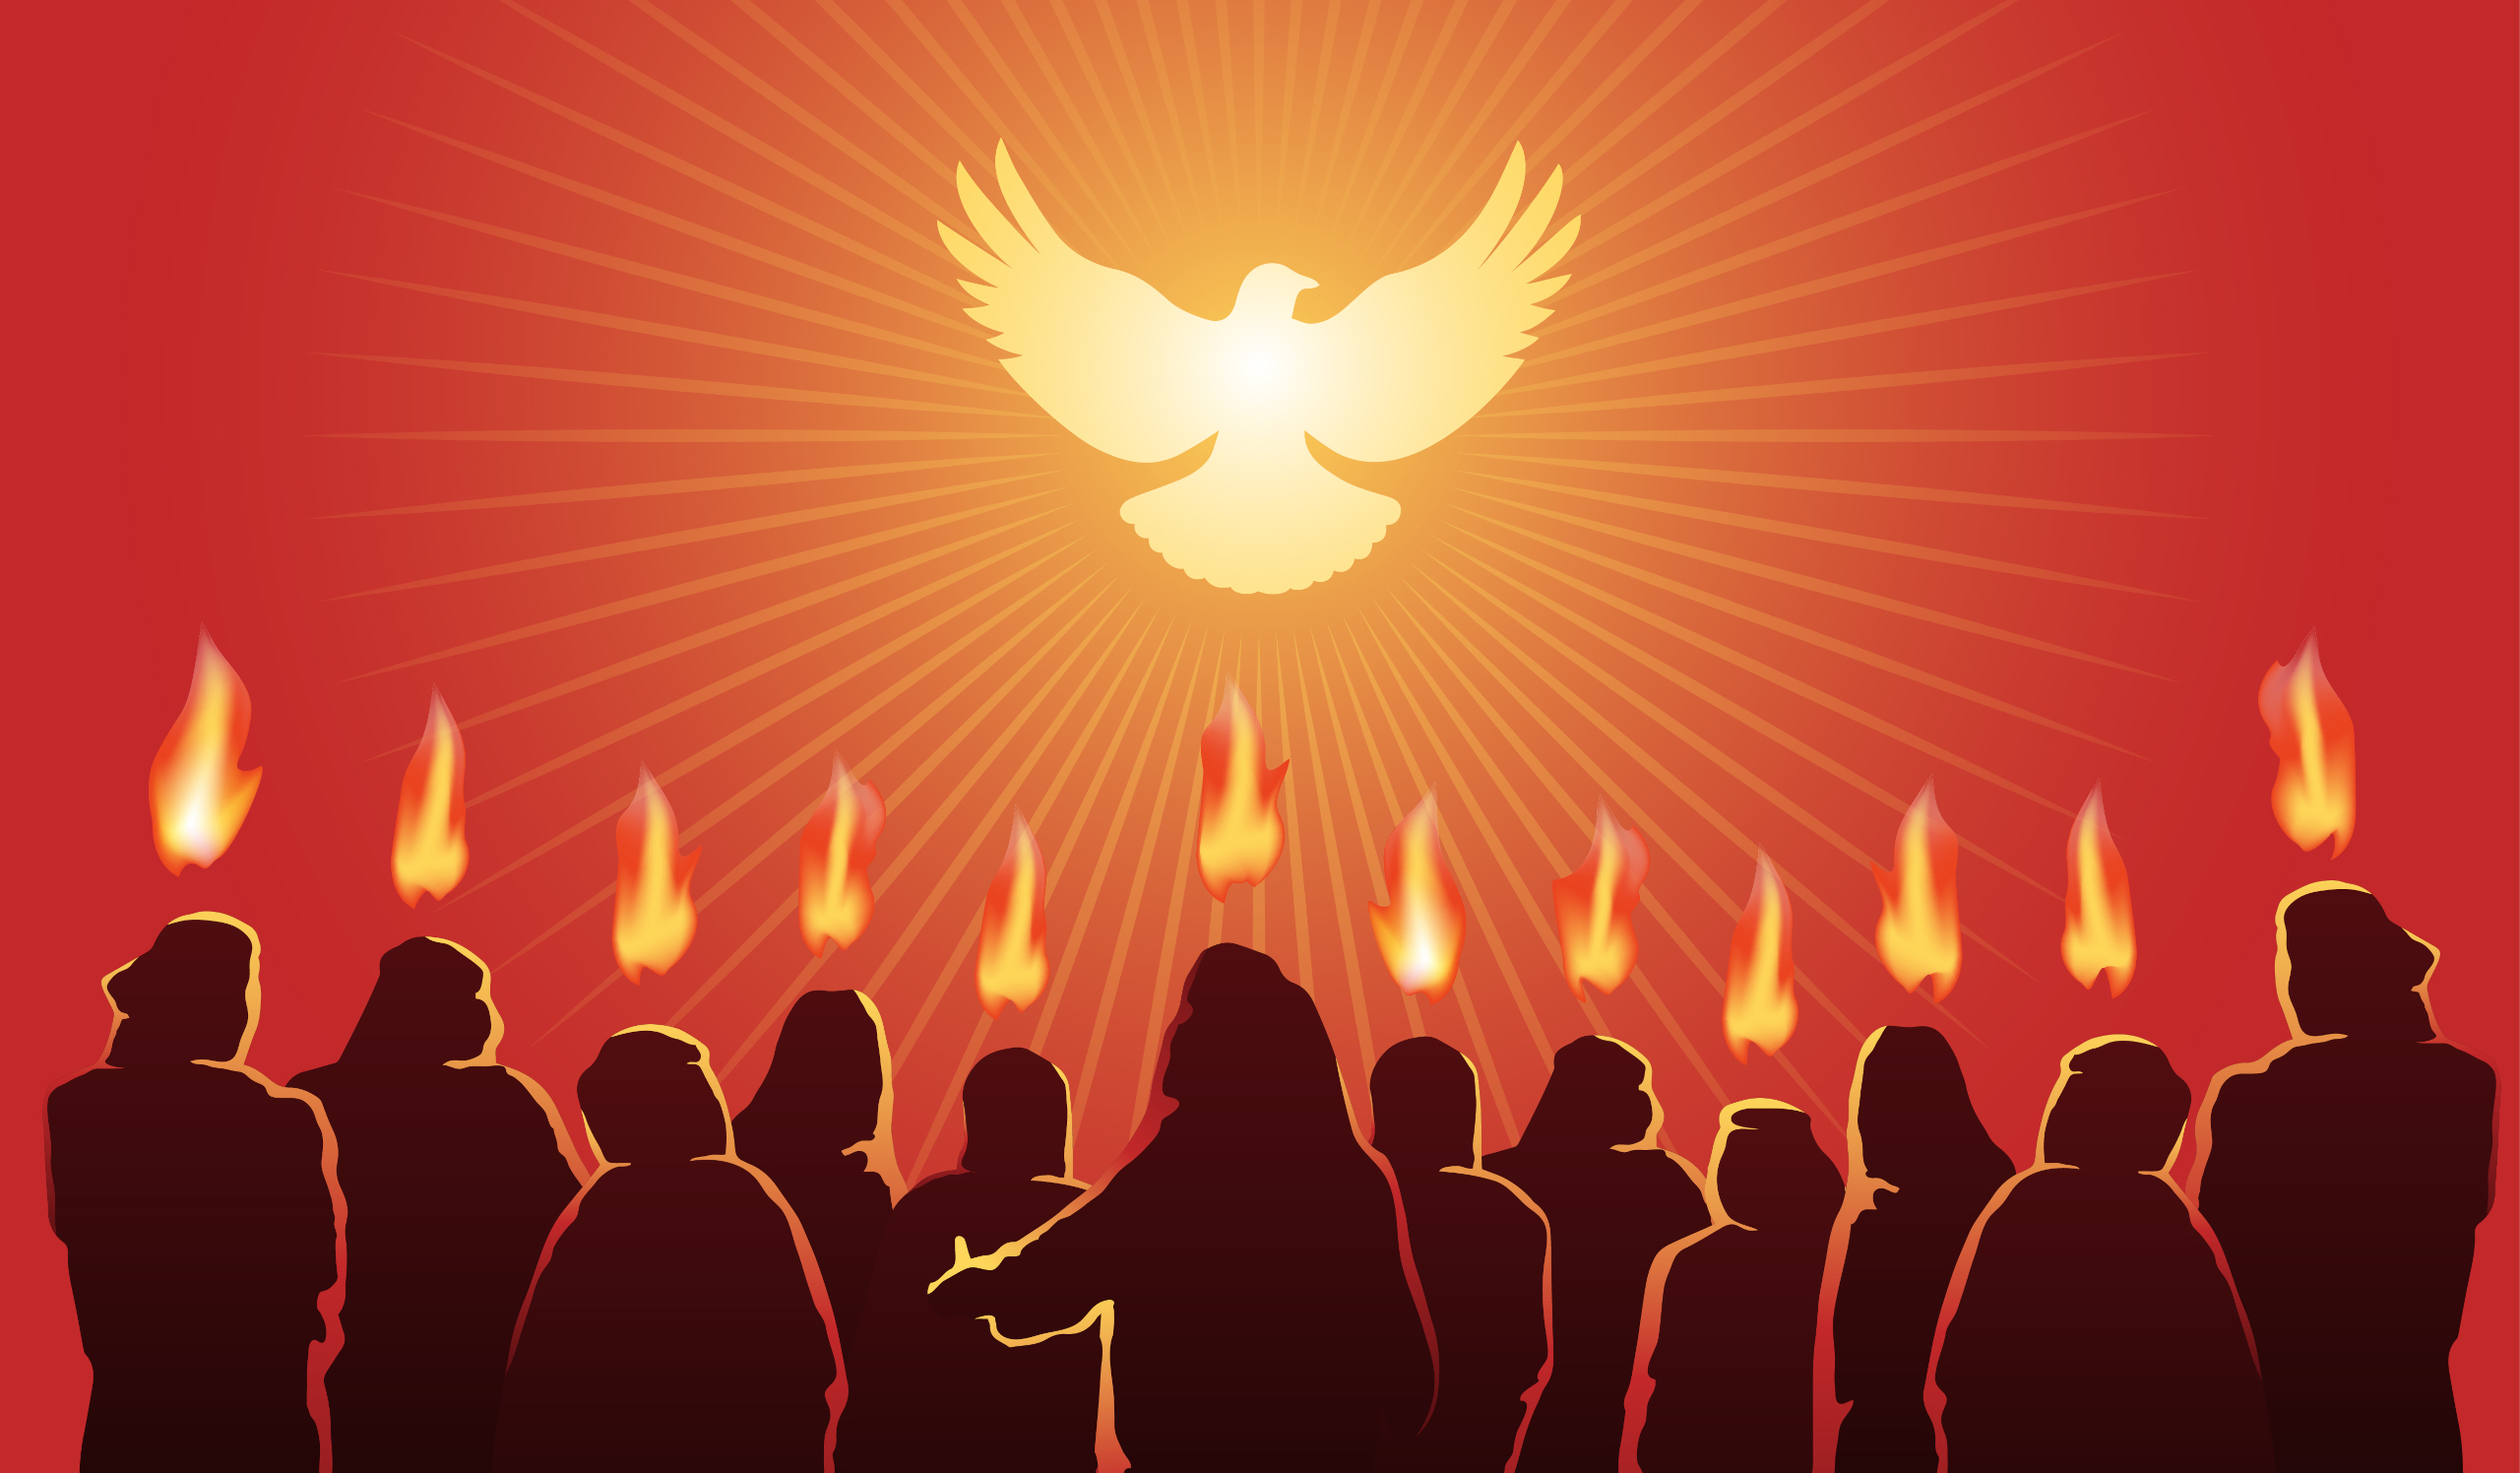 Image of the Holy Spirit descending as tongues of fire.